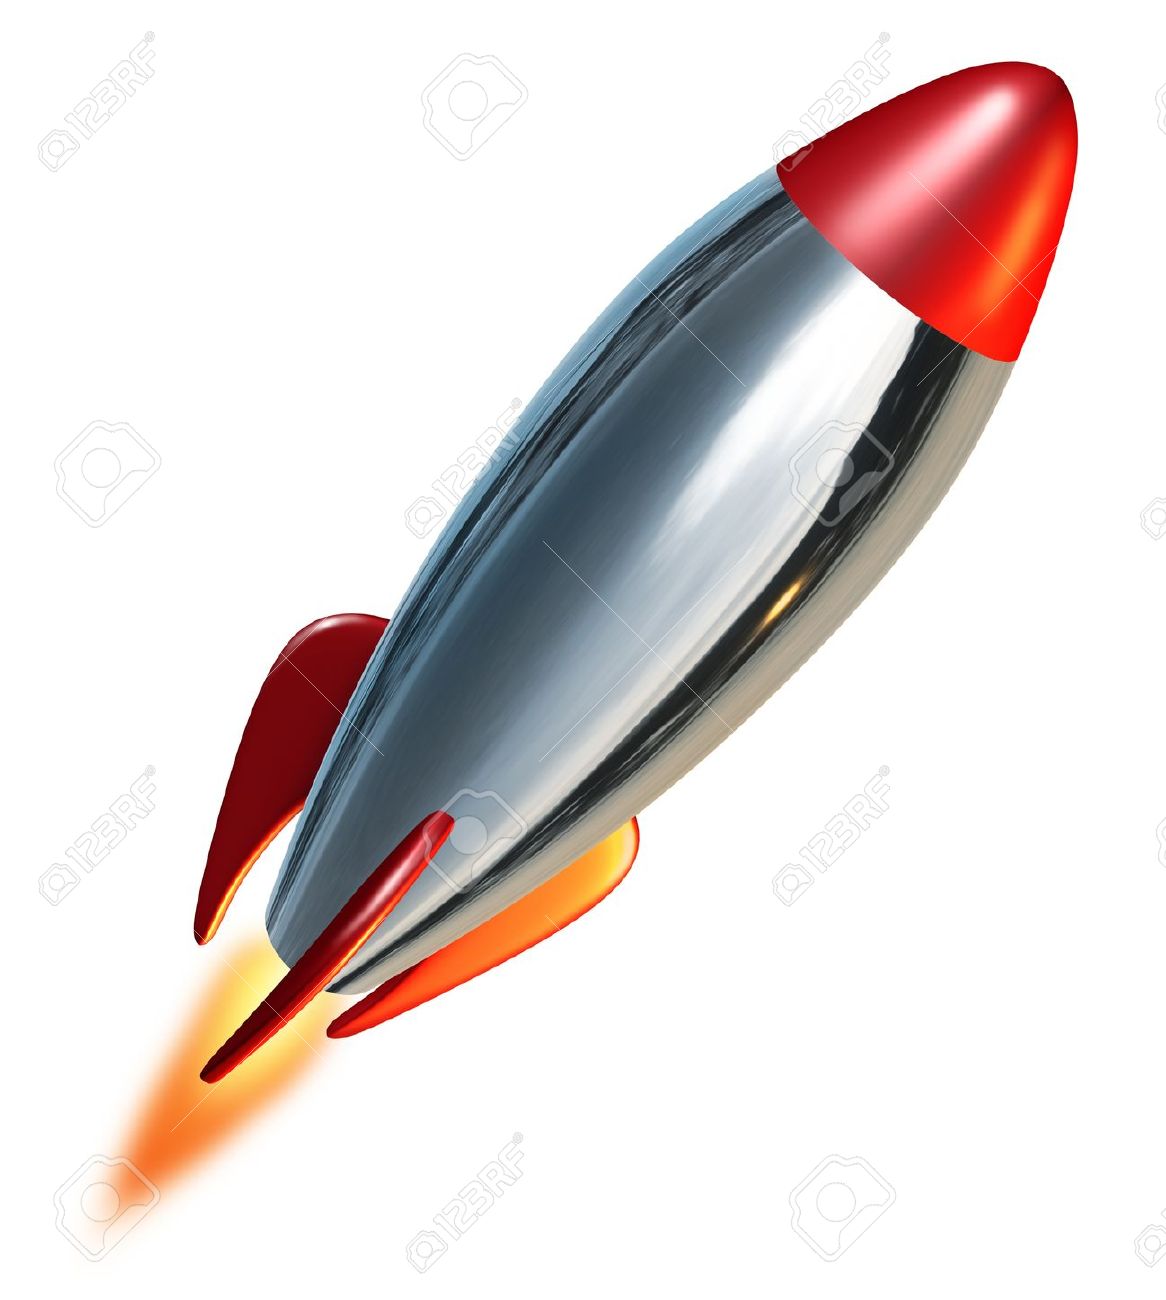 missile clipart